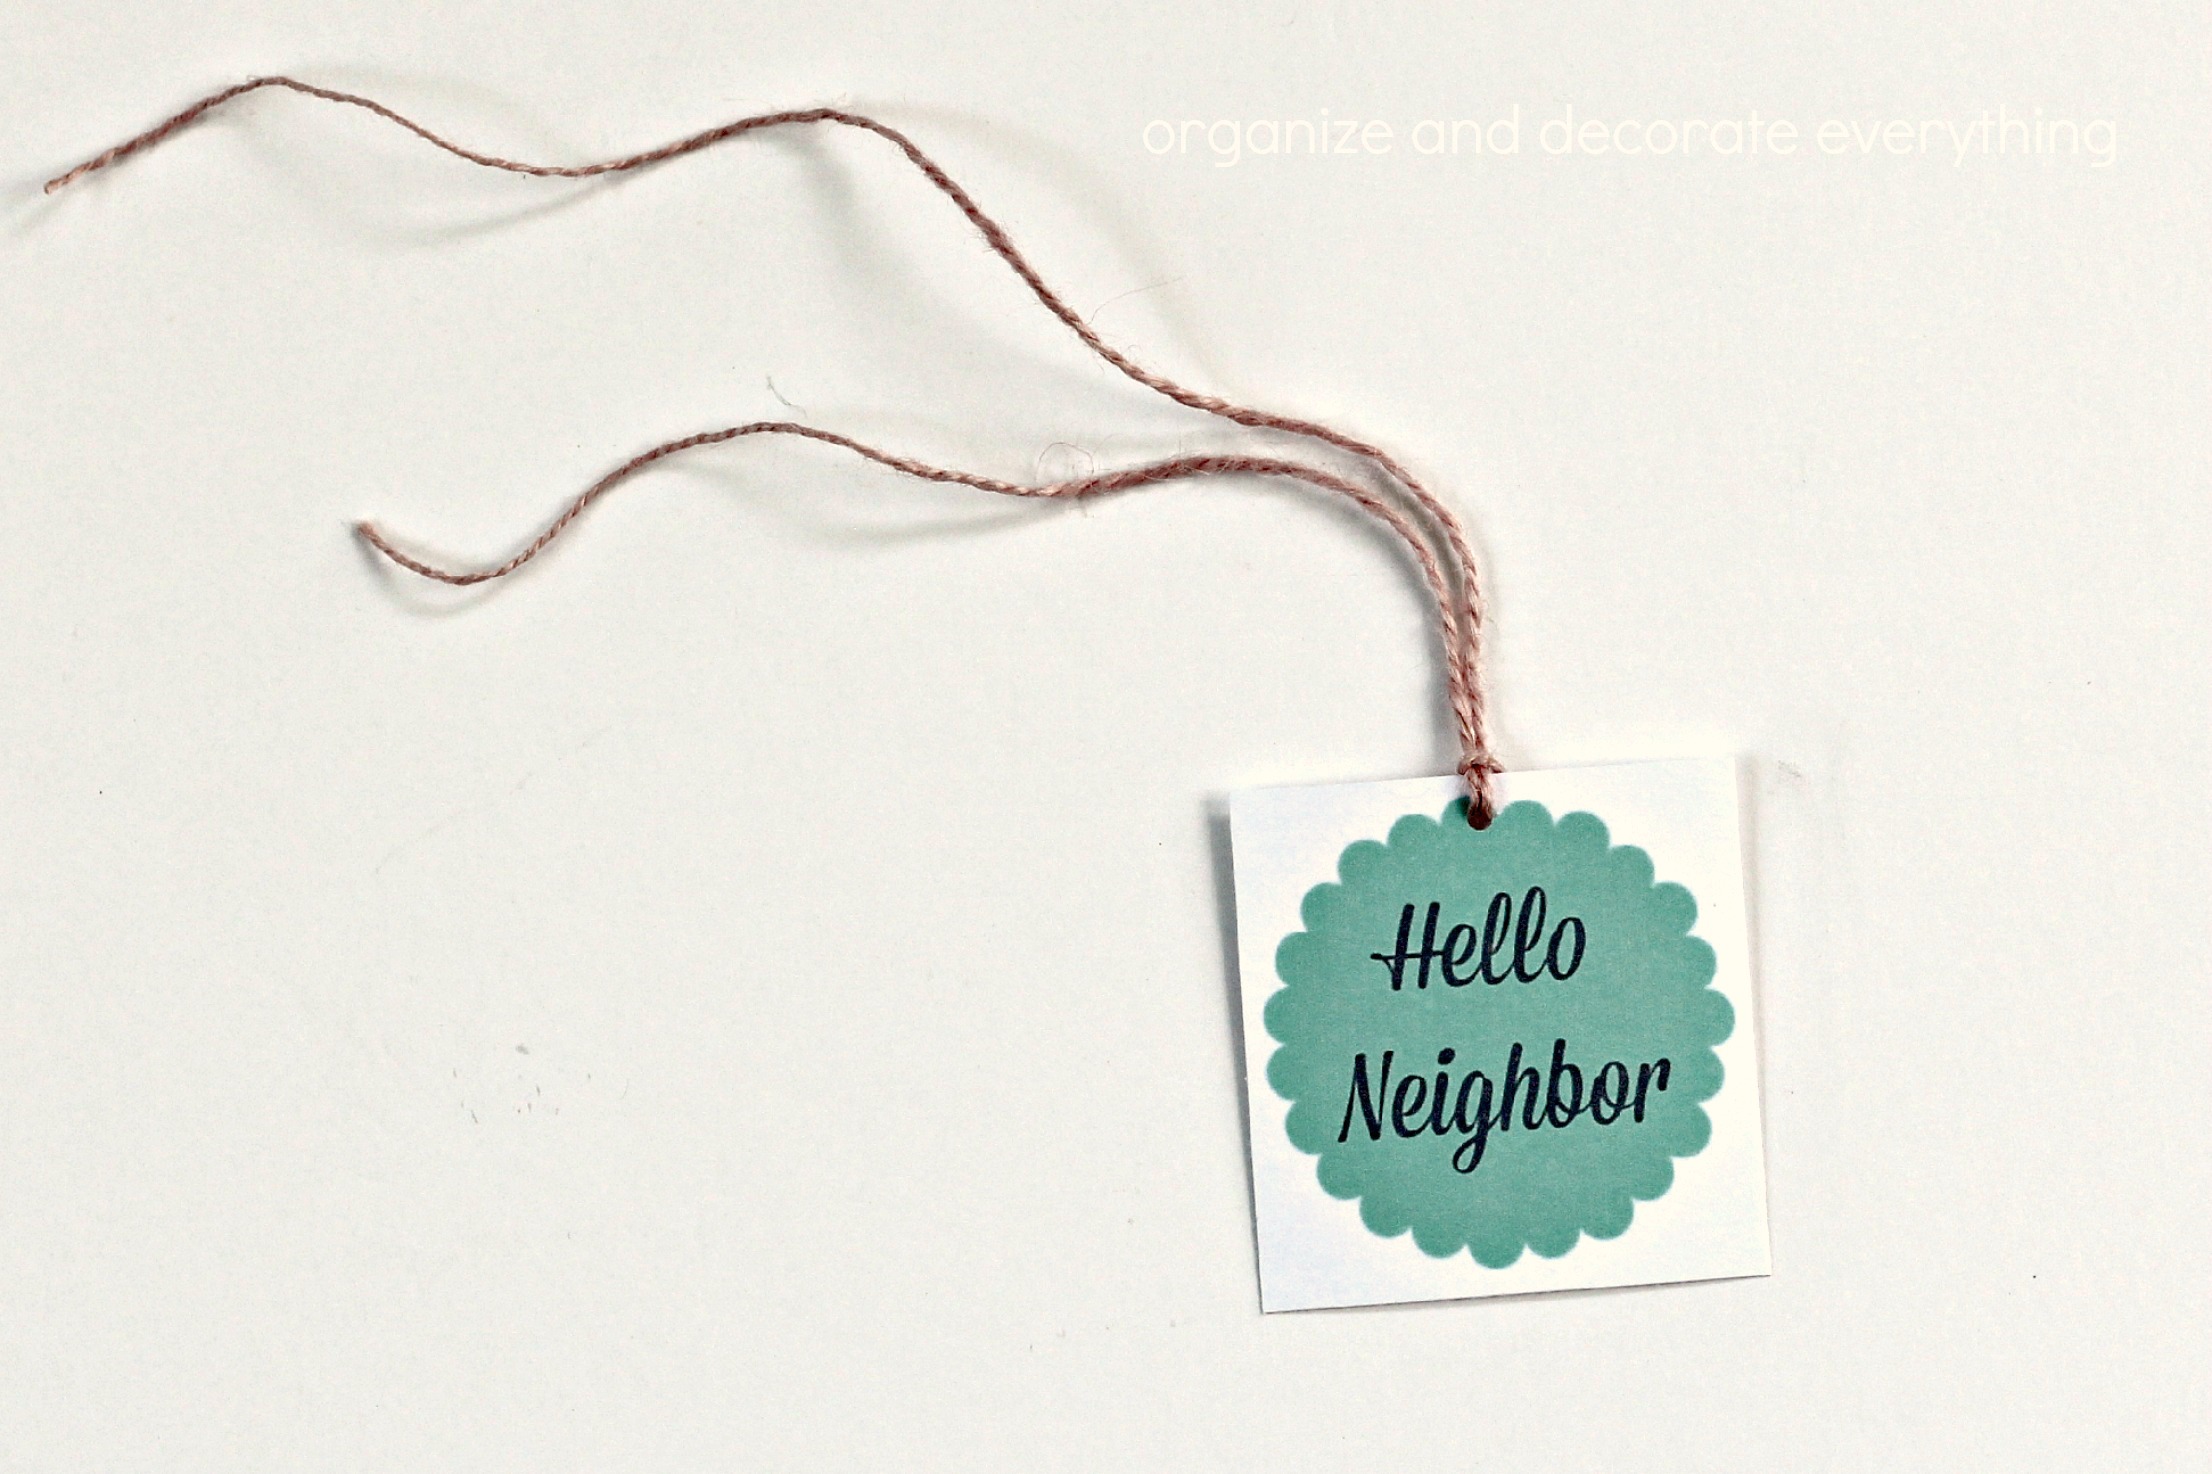 Neighbor Gift Ideas with Printable Tags - Organize and Decorate Everything